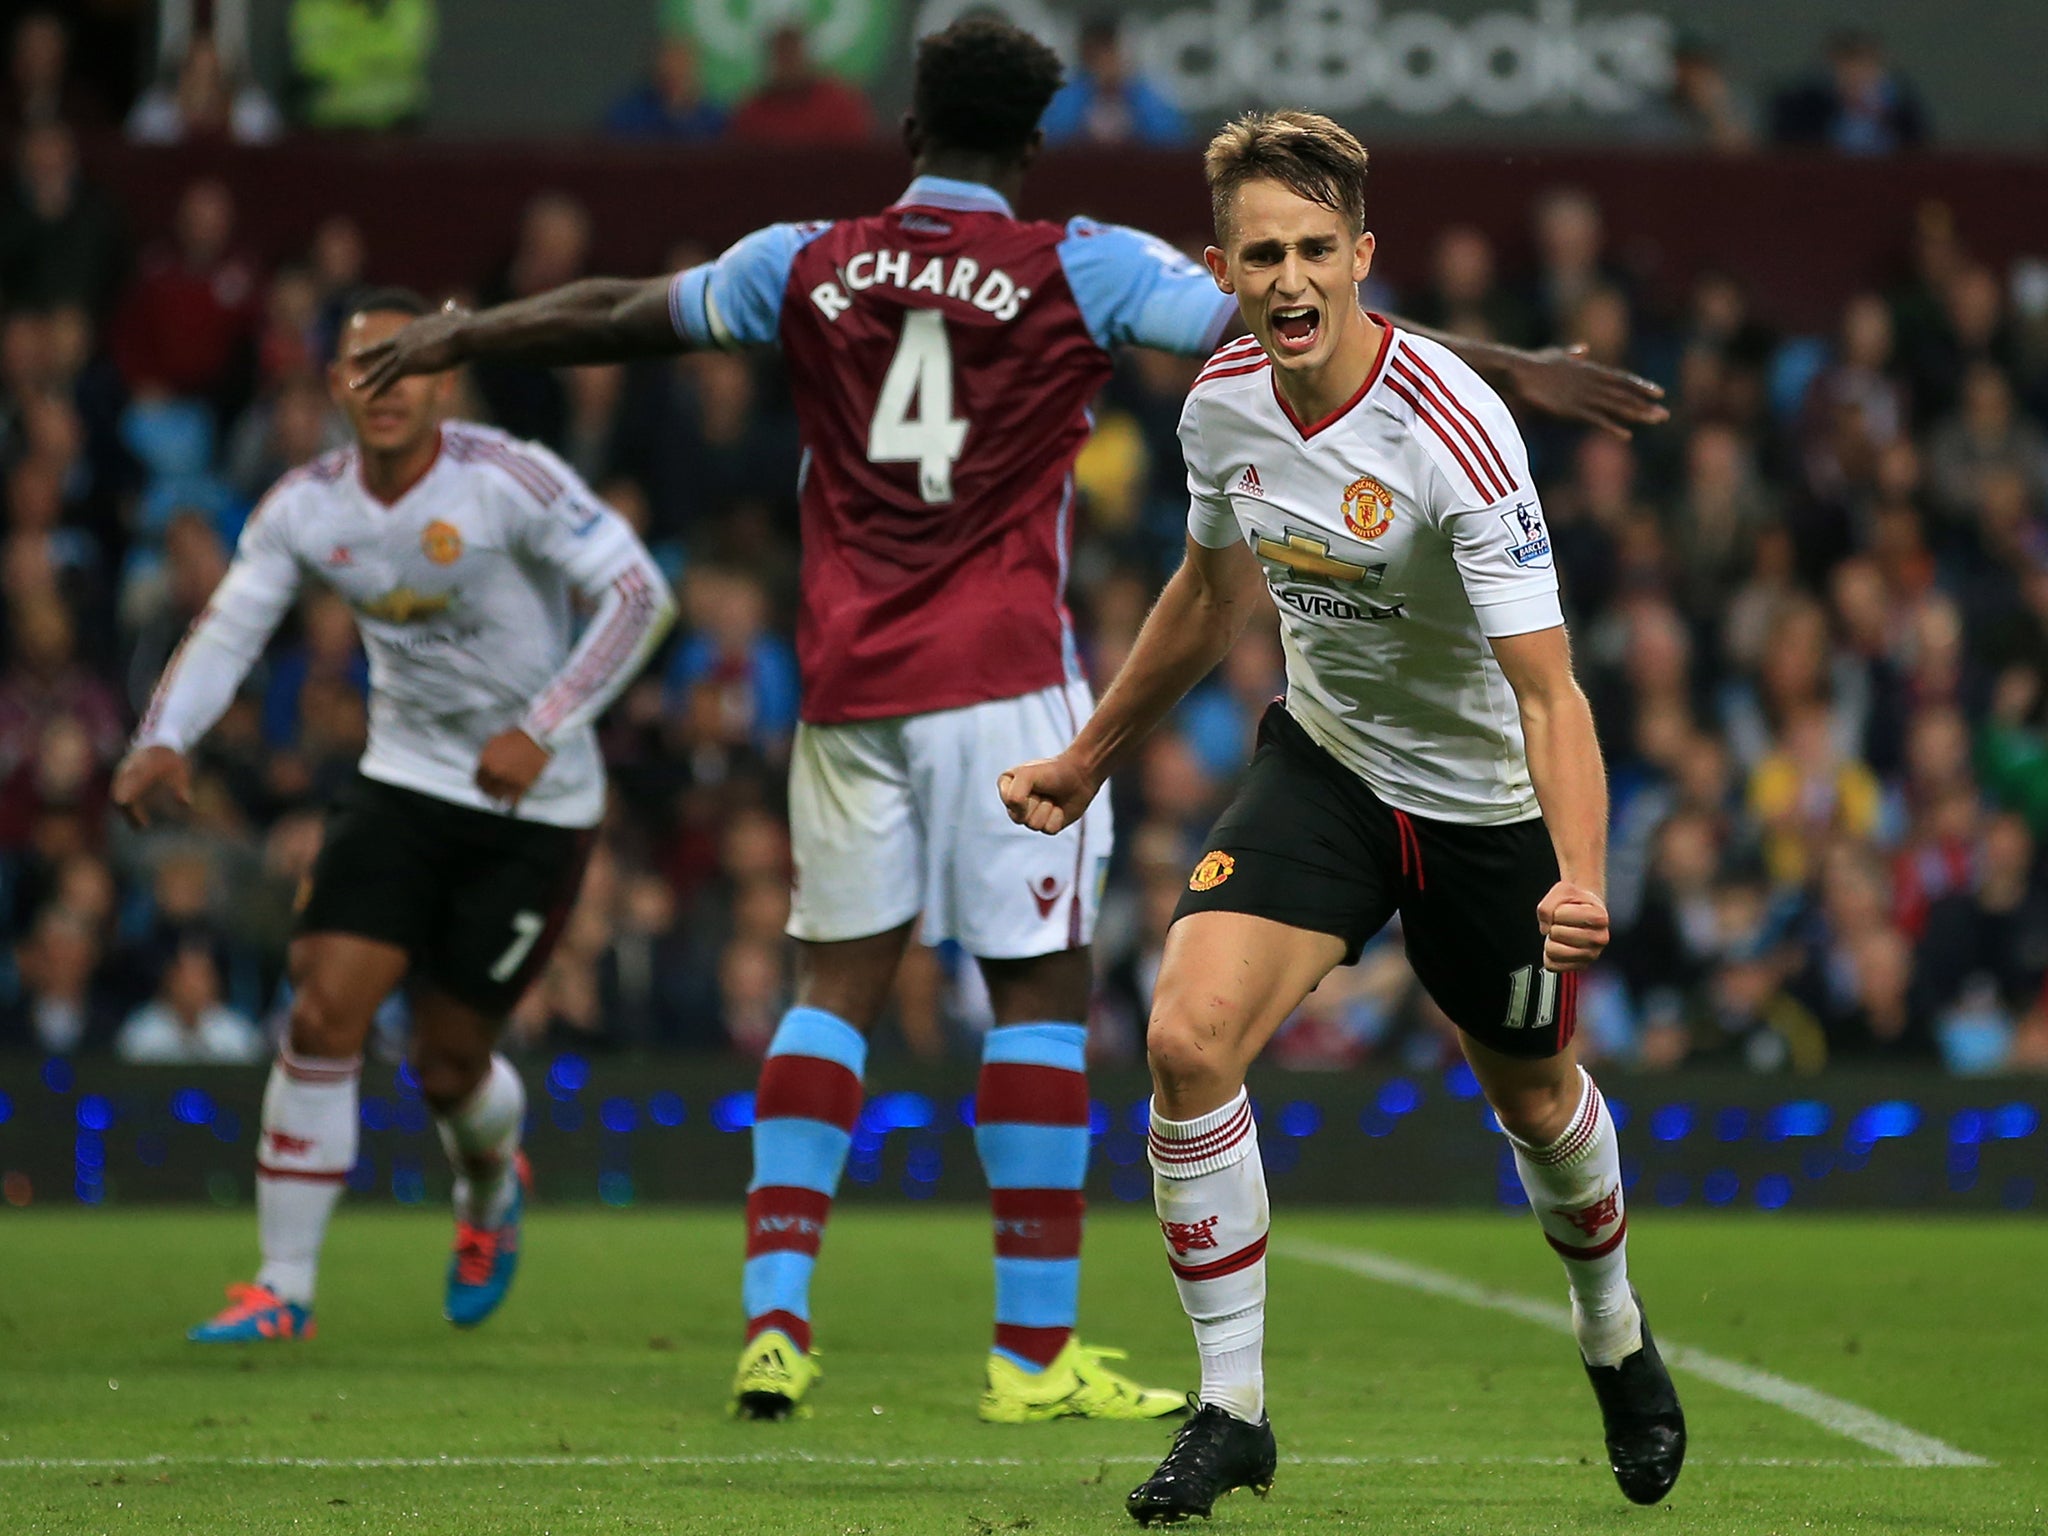 Adnan Januzaj offered a reminder of his potential with his winning goal against Aston Villa